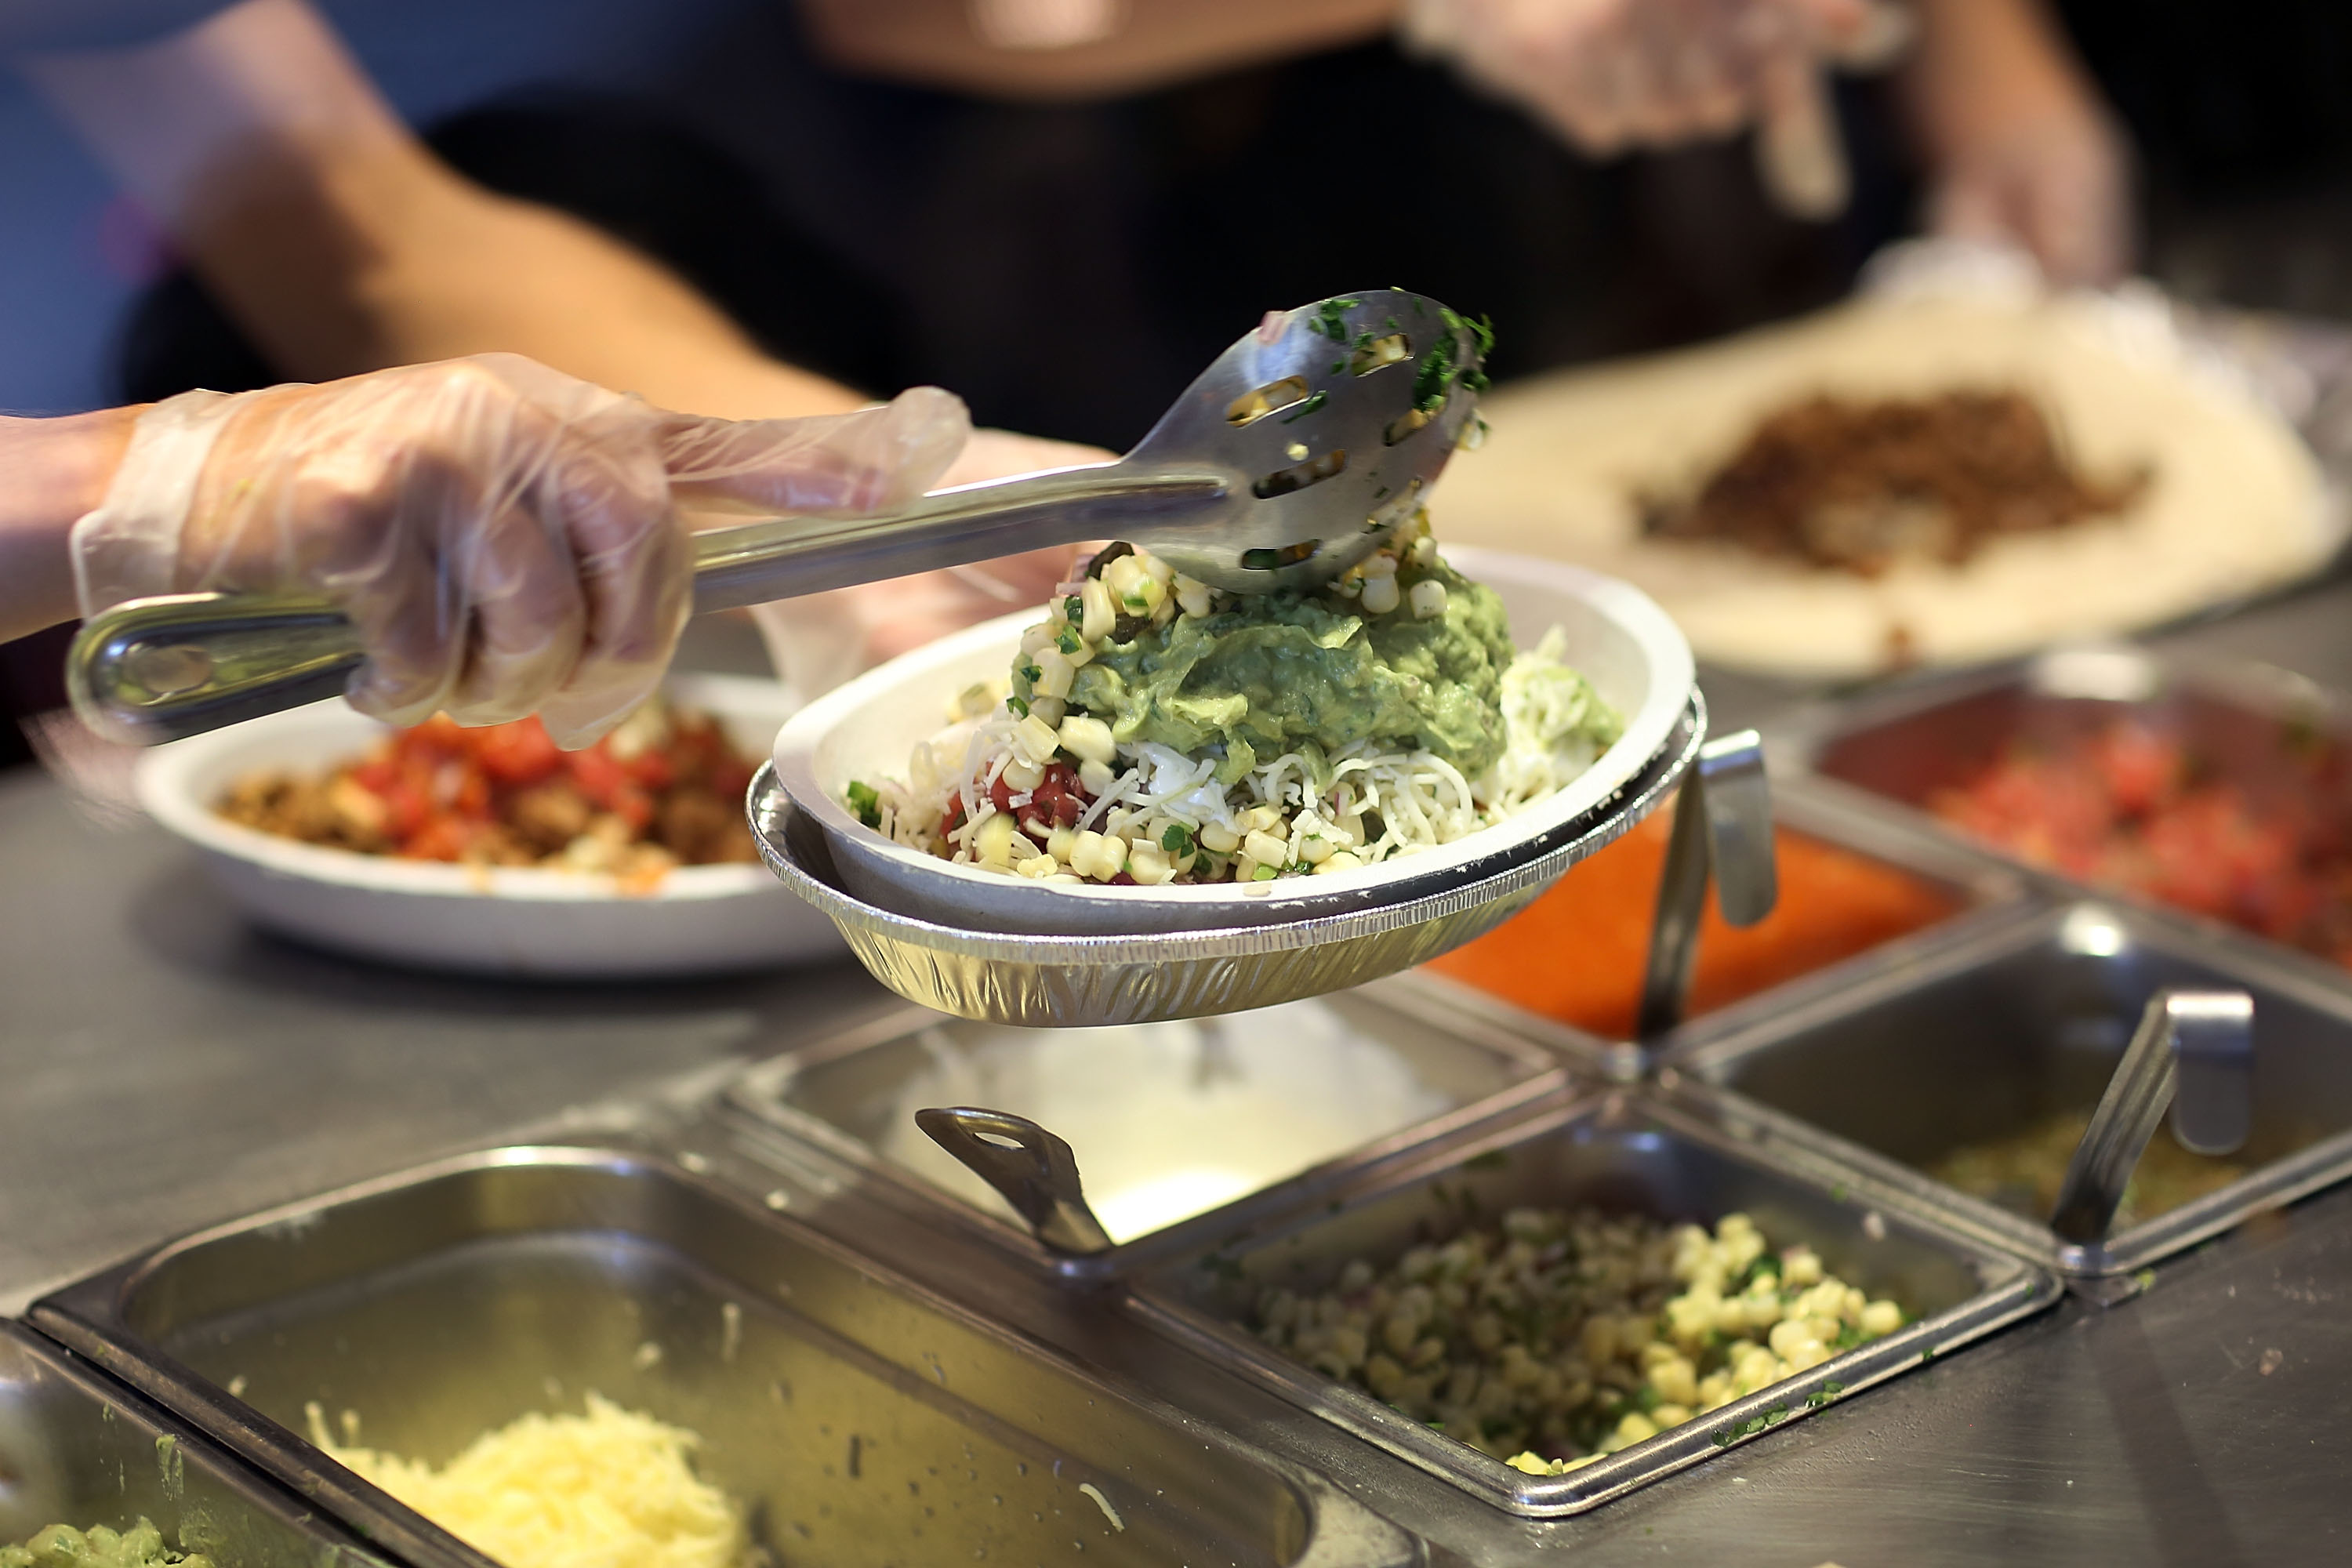 Chipotle restaurant workers fill orders for customers on the day that the company announced it will only use non-GMO ingredients in its food on April 27, 2015. (Joe Raedle&mdash;Getty Images)